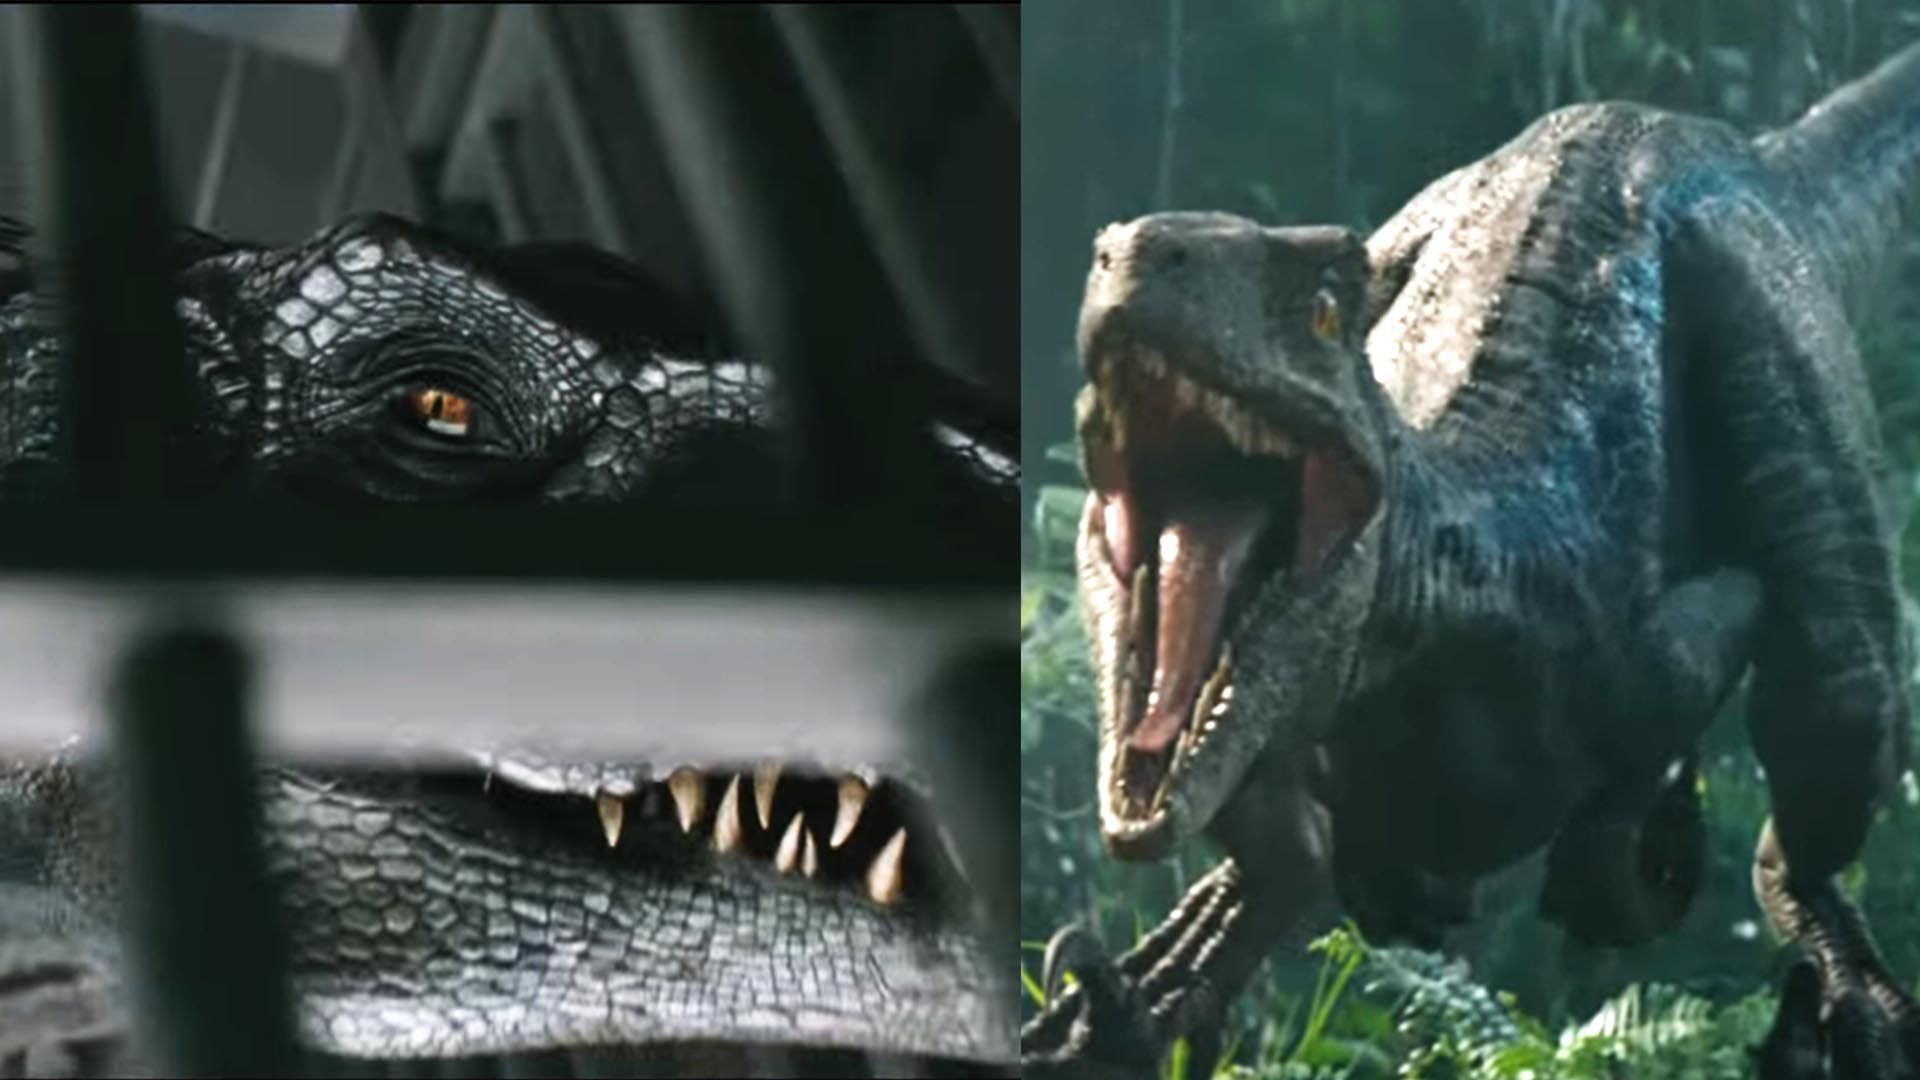 Who would win? vs Indoraptor